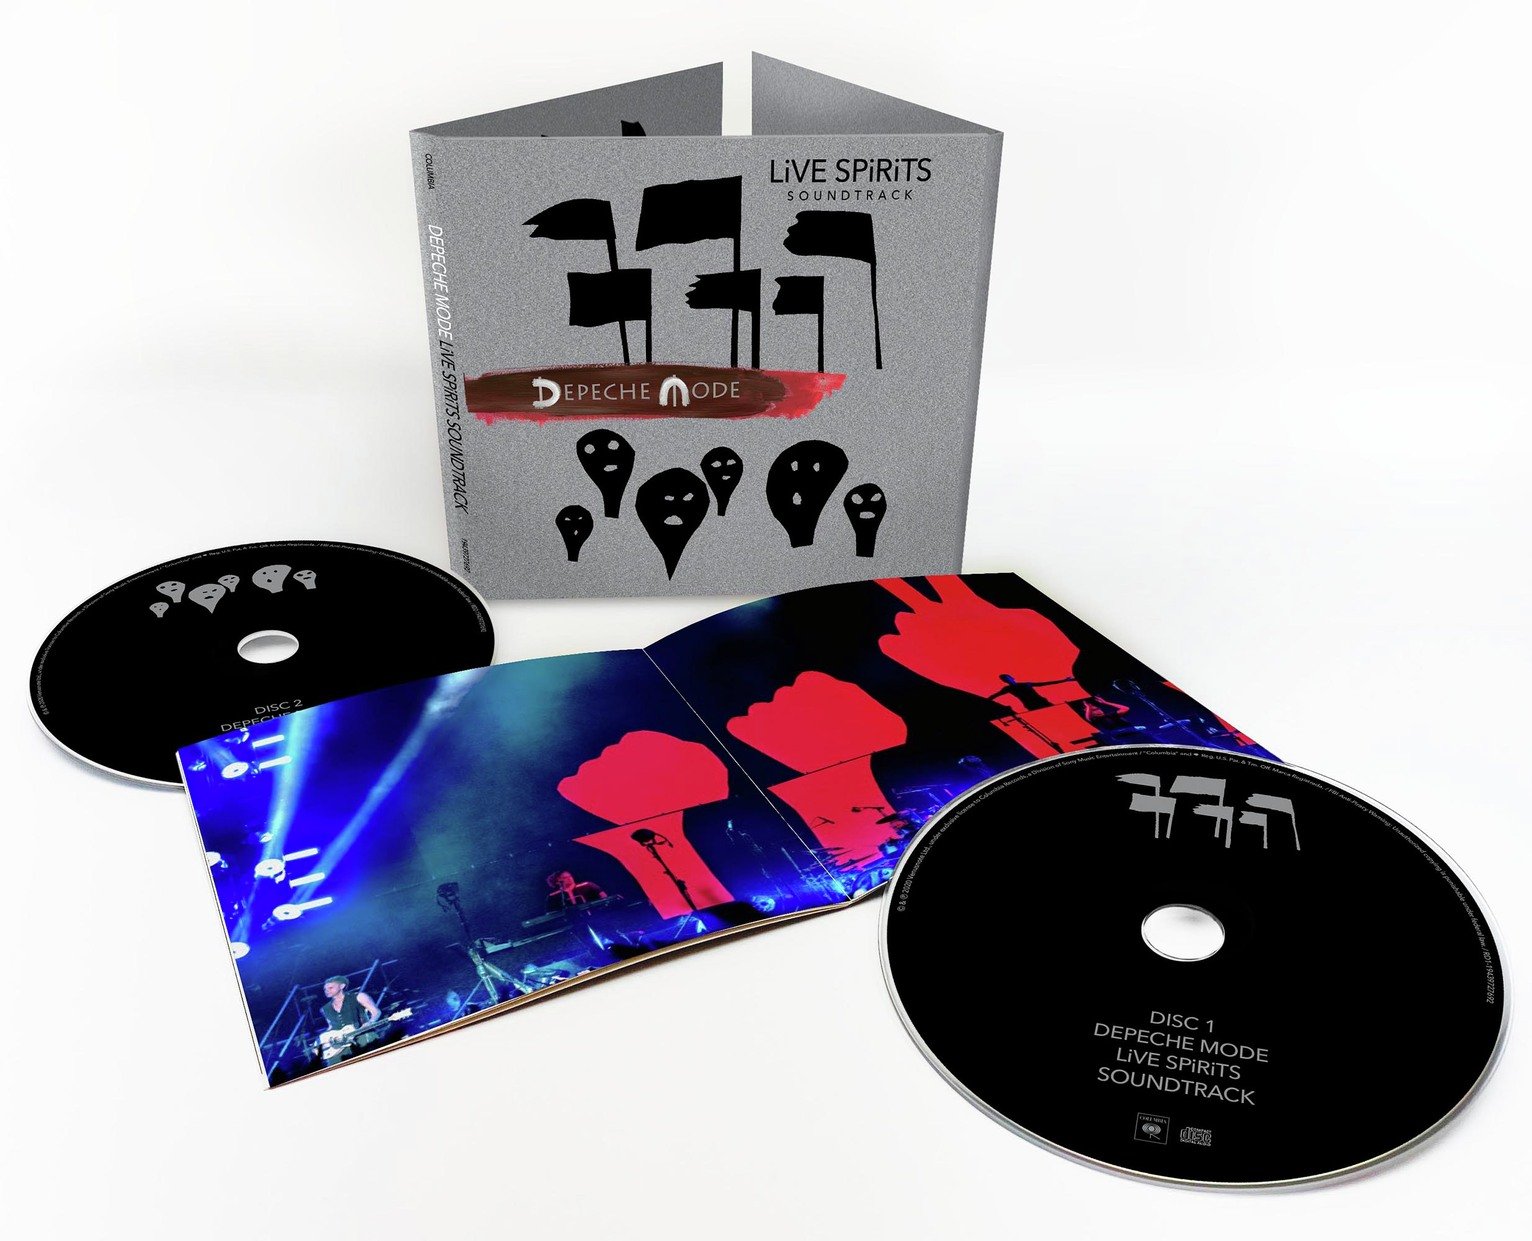 Depeche Mode SPiRiTS in the Forest CD & DVD Review